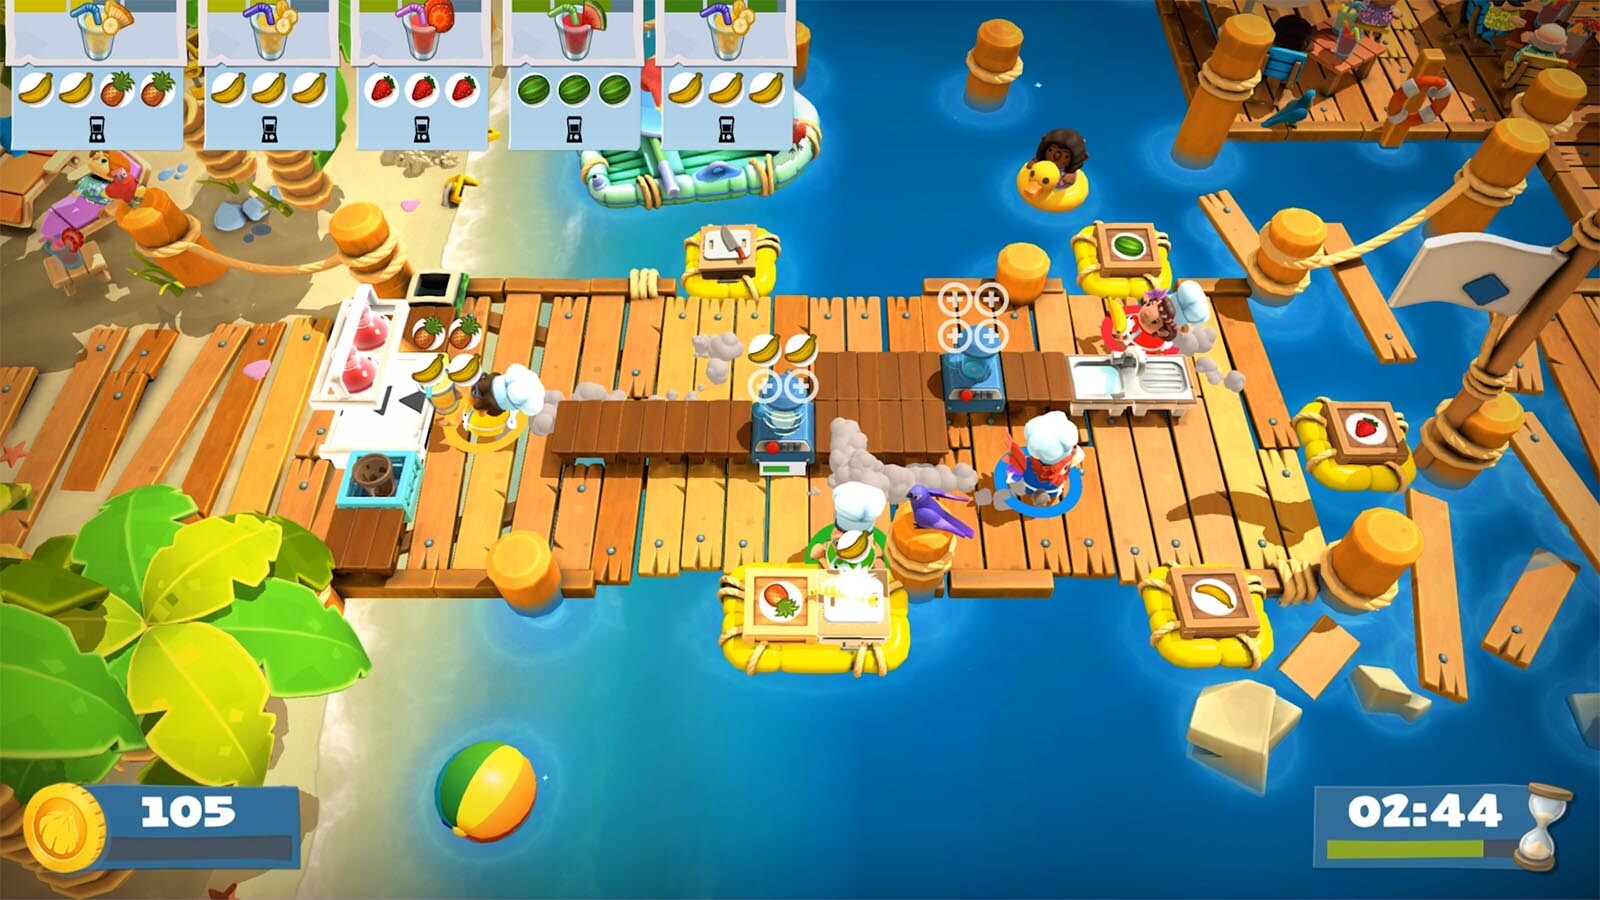 Is Overcooked 2 local multiplayer?